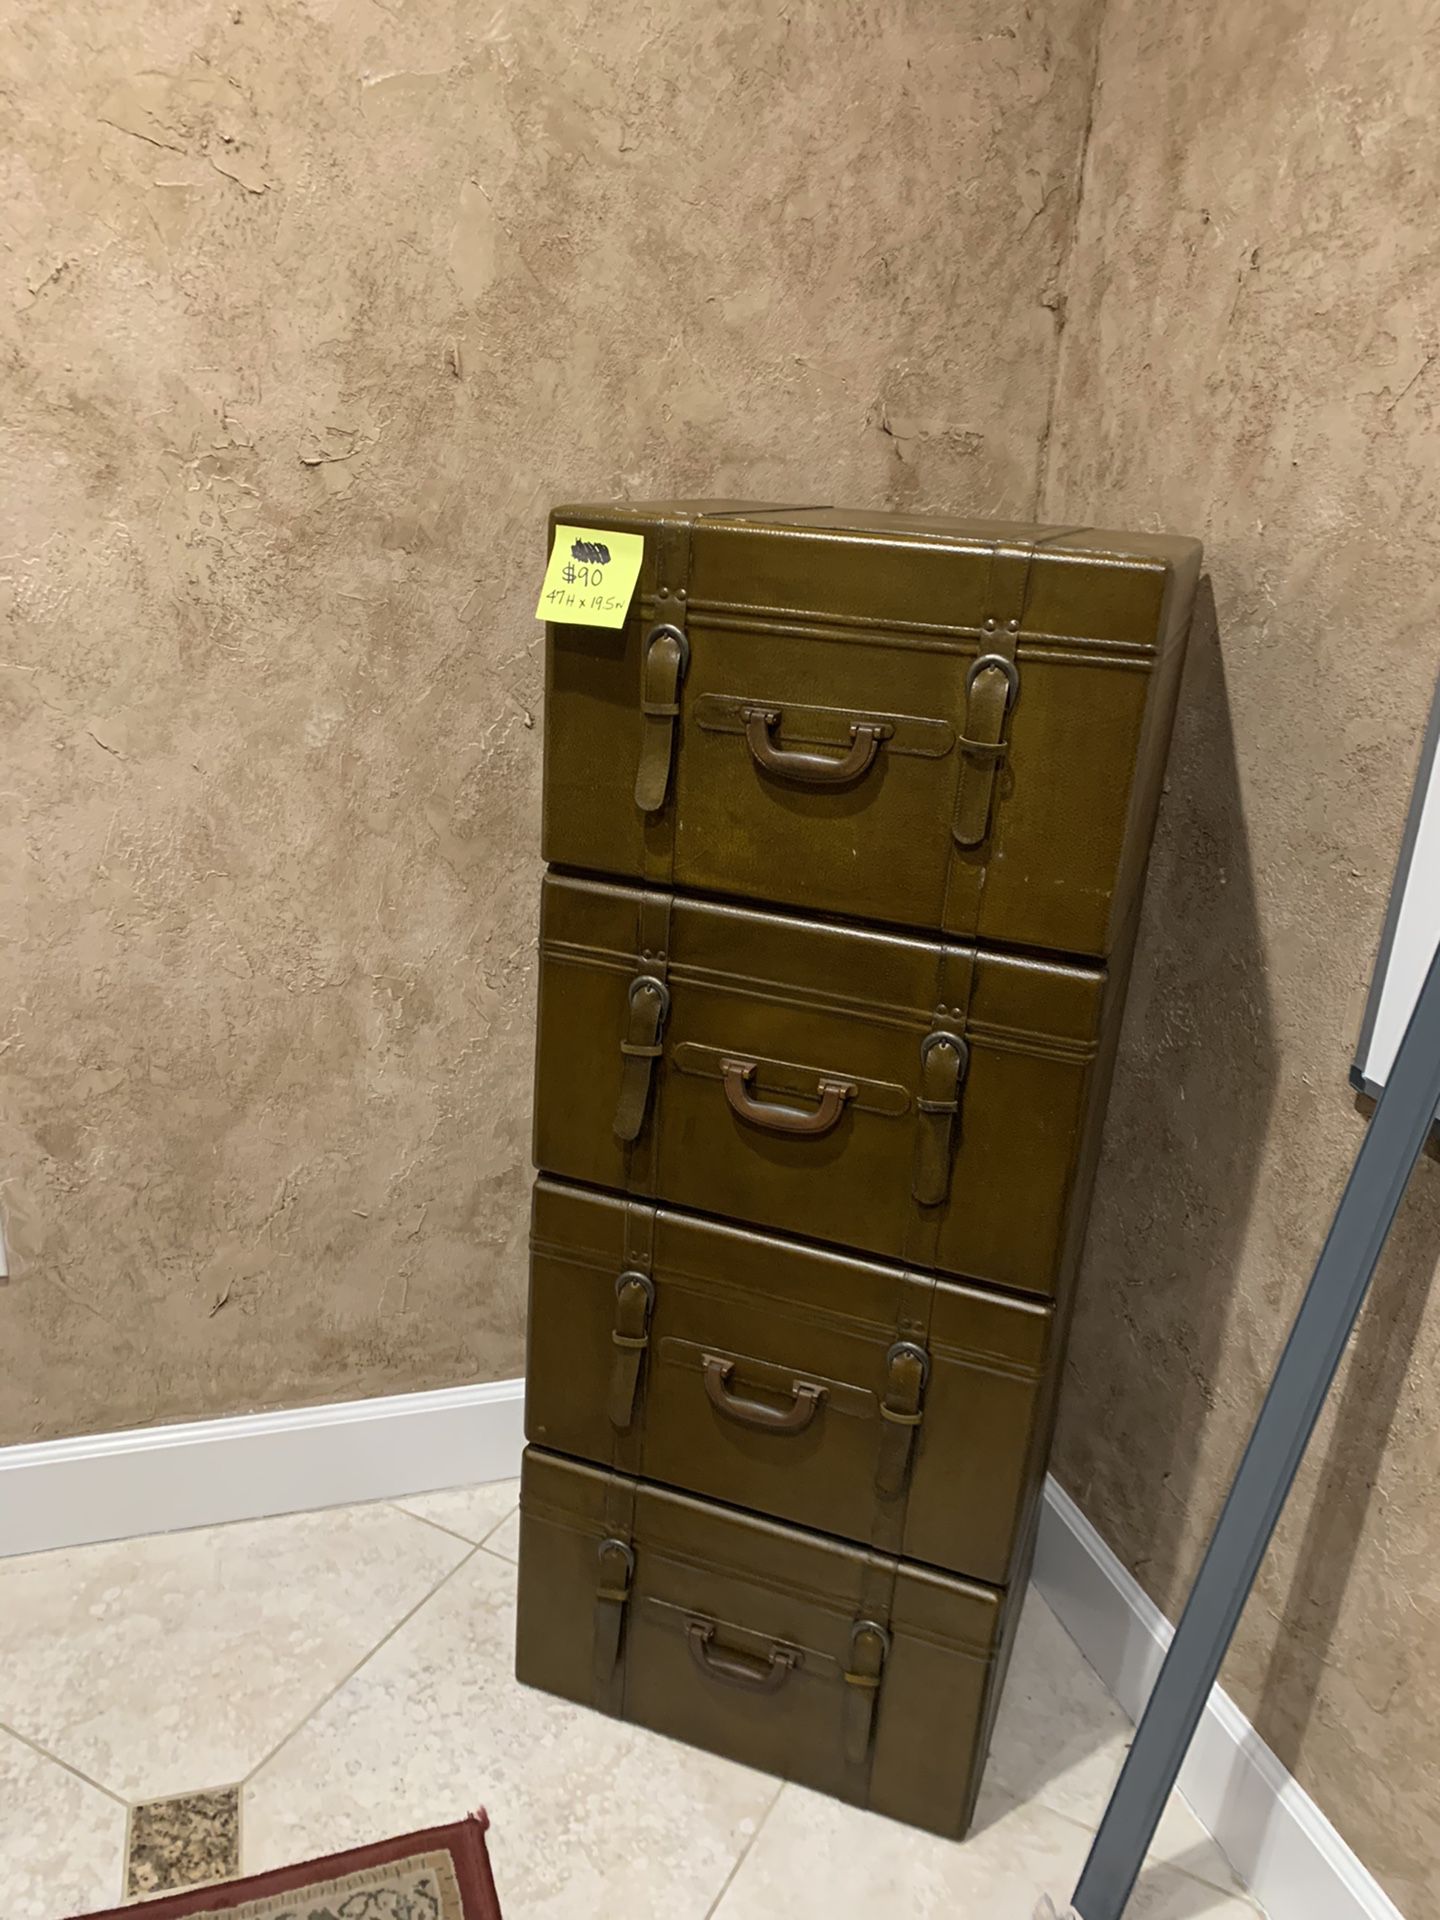 File Cabinet - totally disguised file cabinet